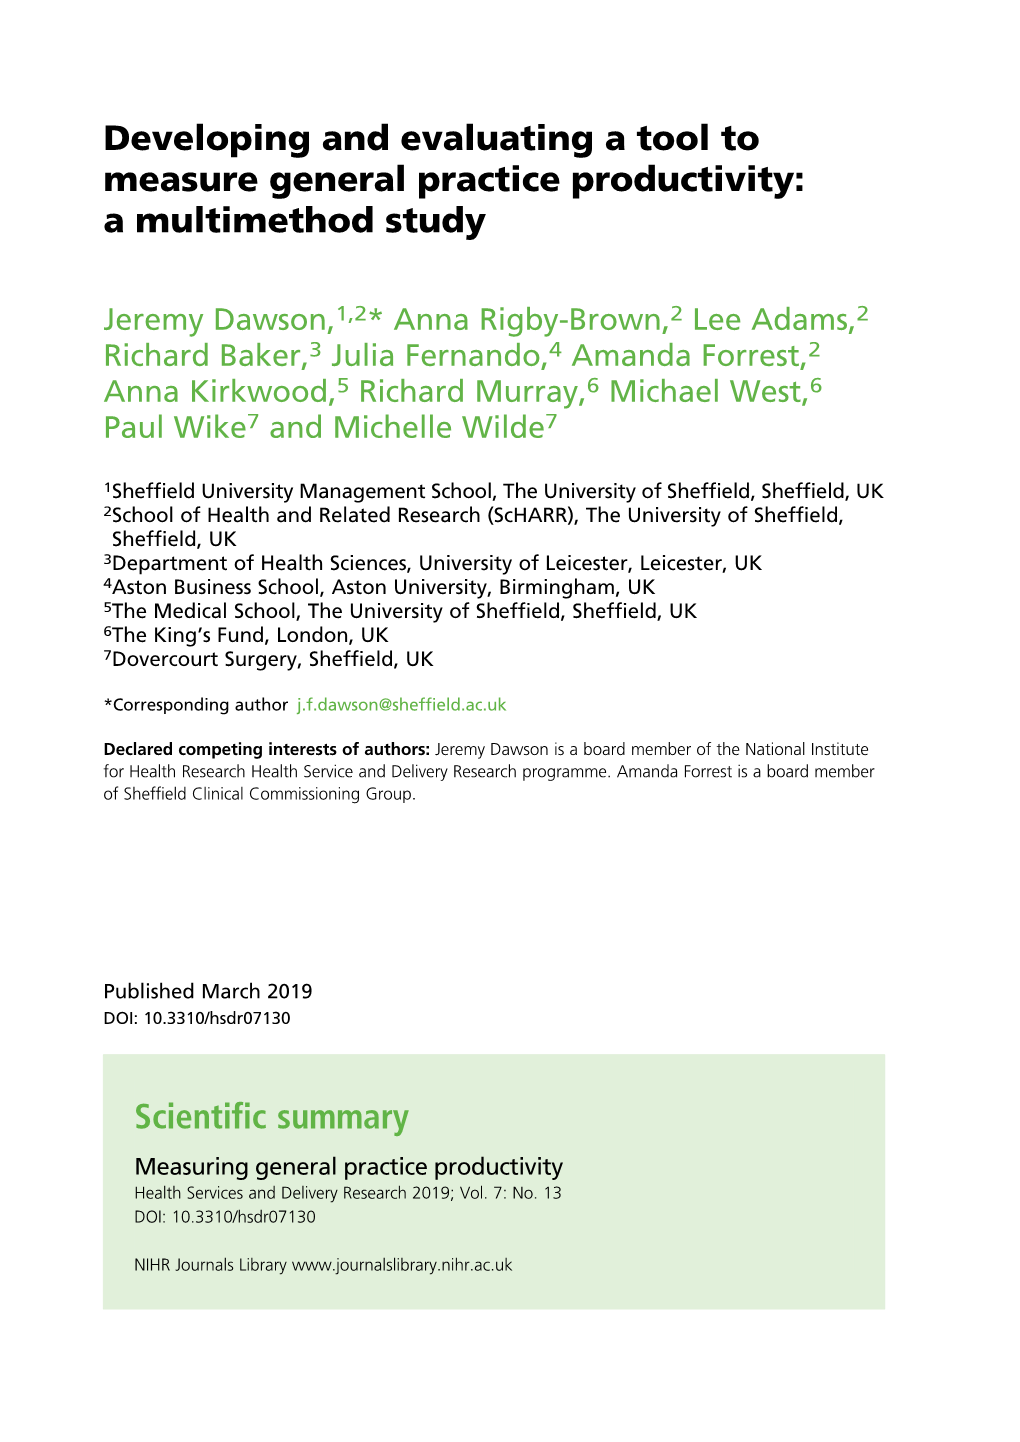 Developing and Evaluating a Tool to Measure General Practice Productivity: a Multimethod Study